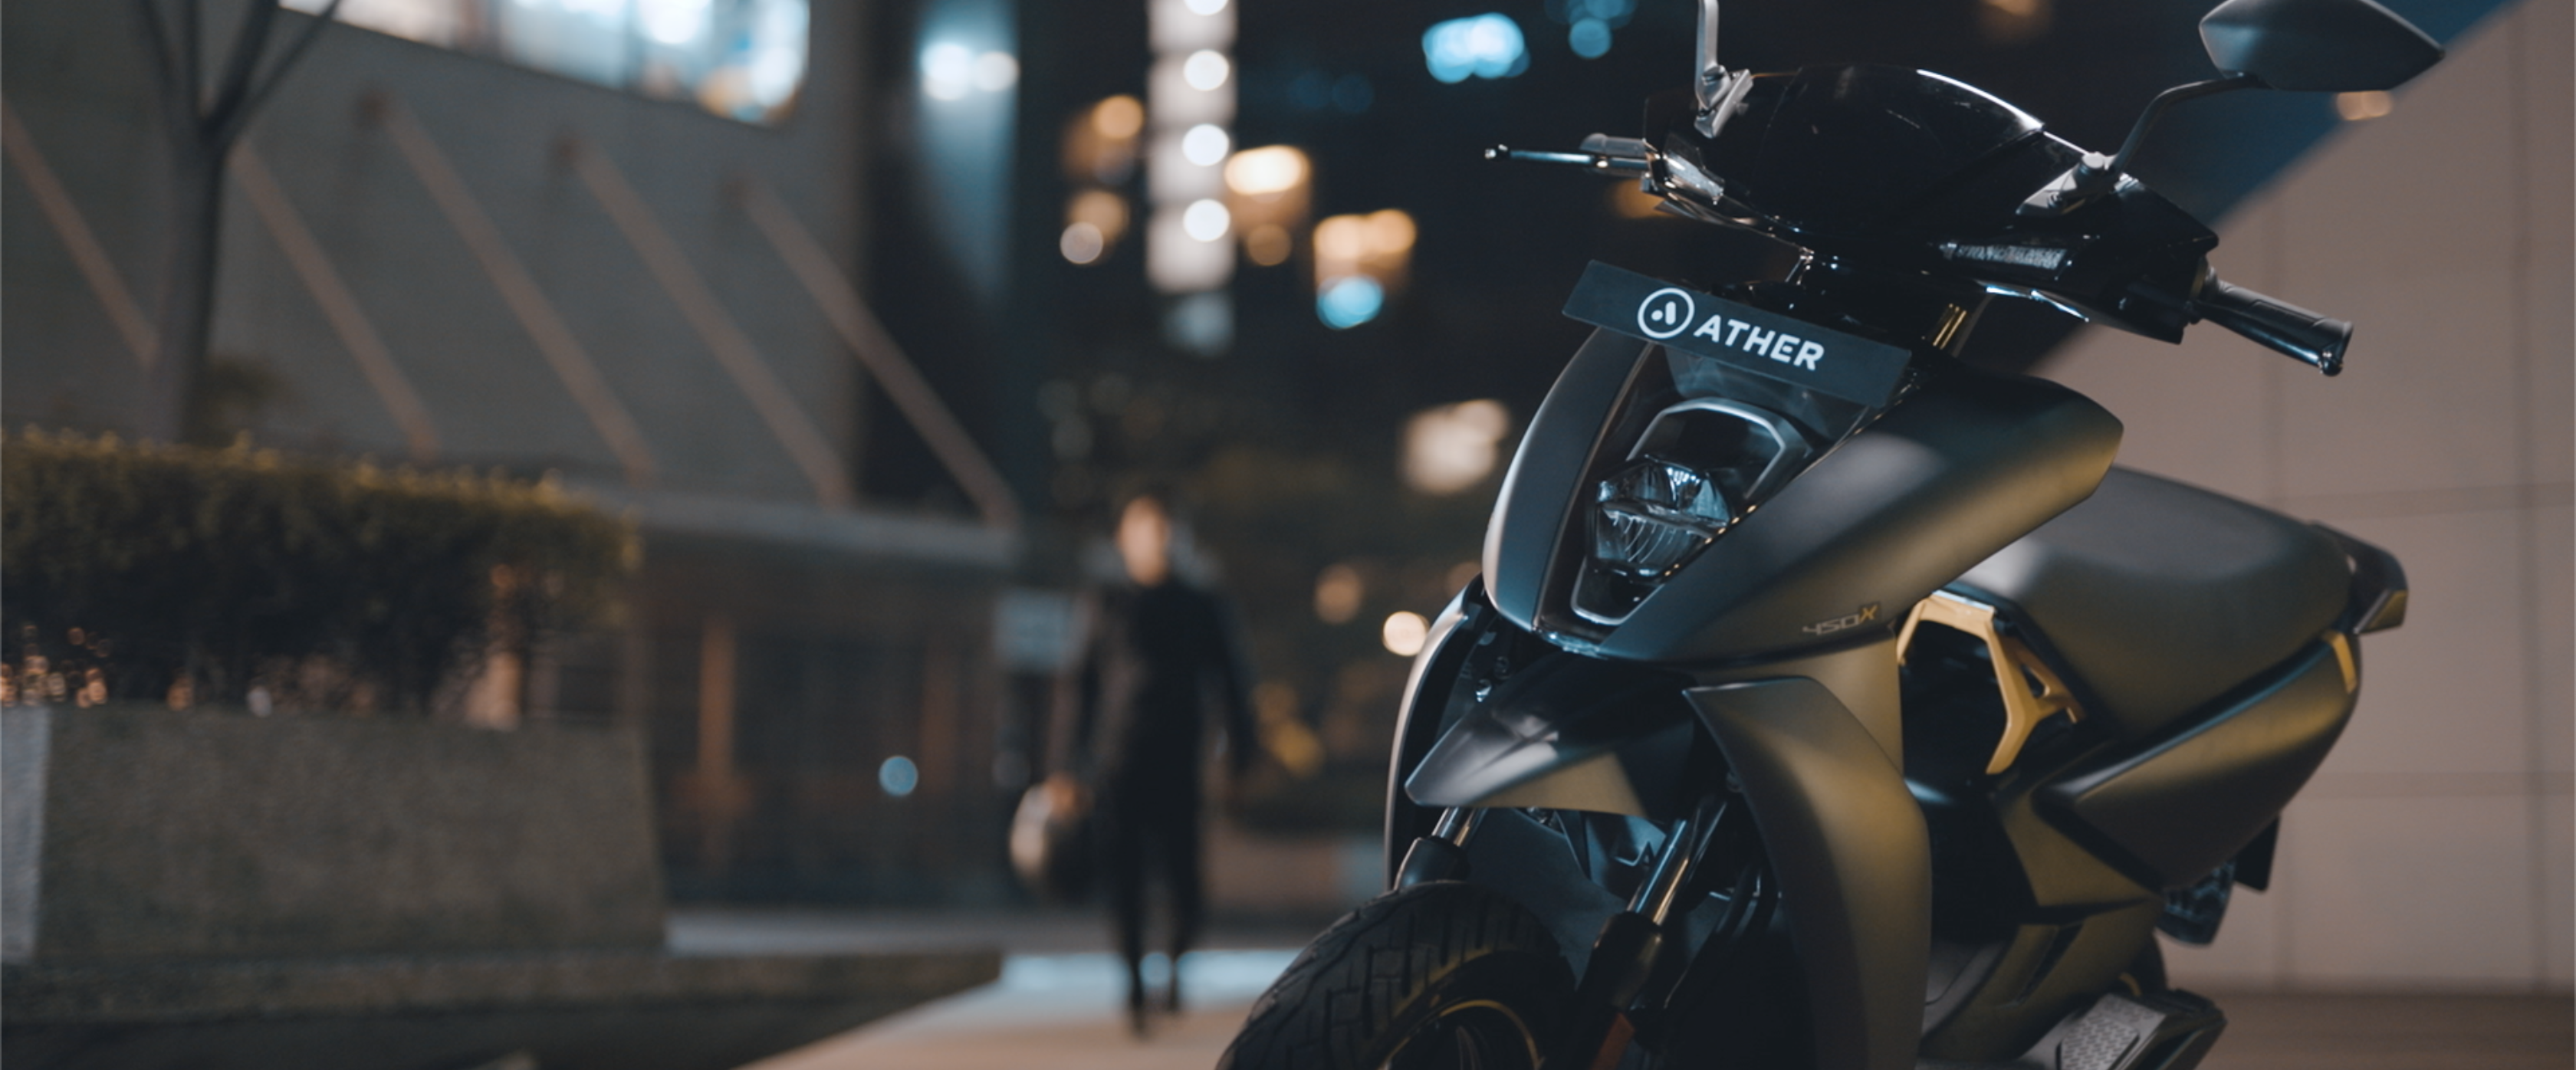 <strong>Living with the ATHER 450 X Gen 3</strong>